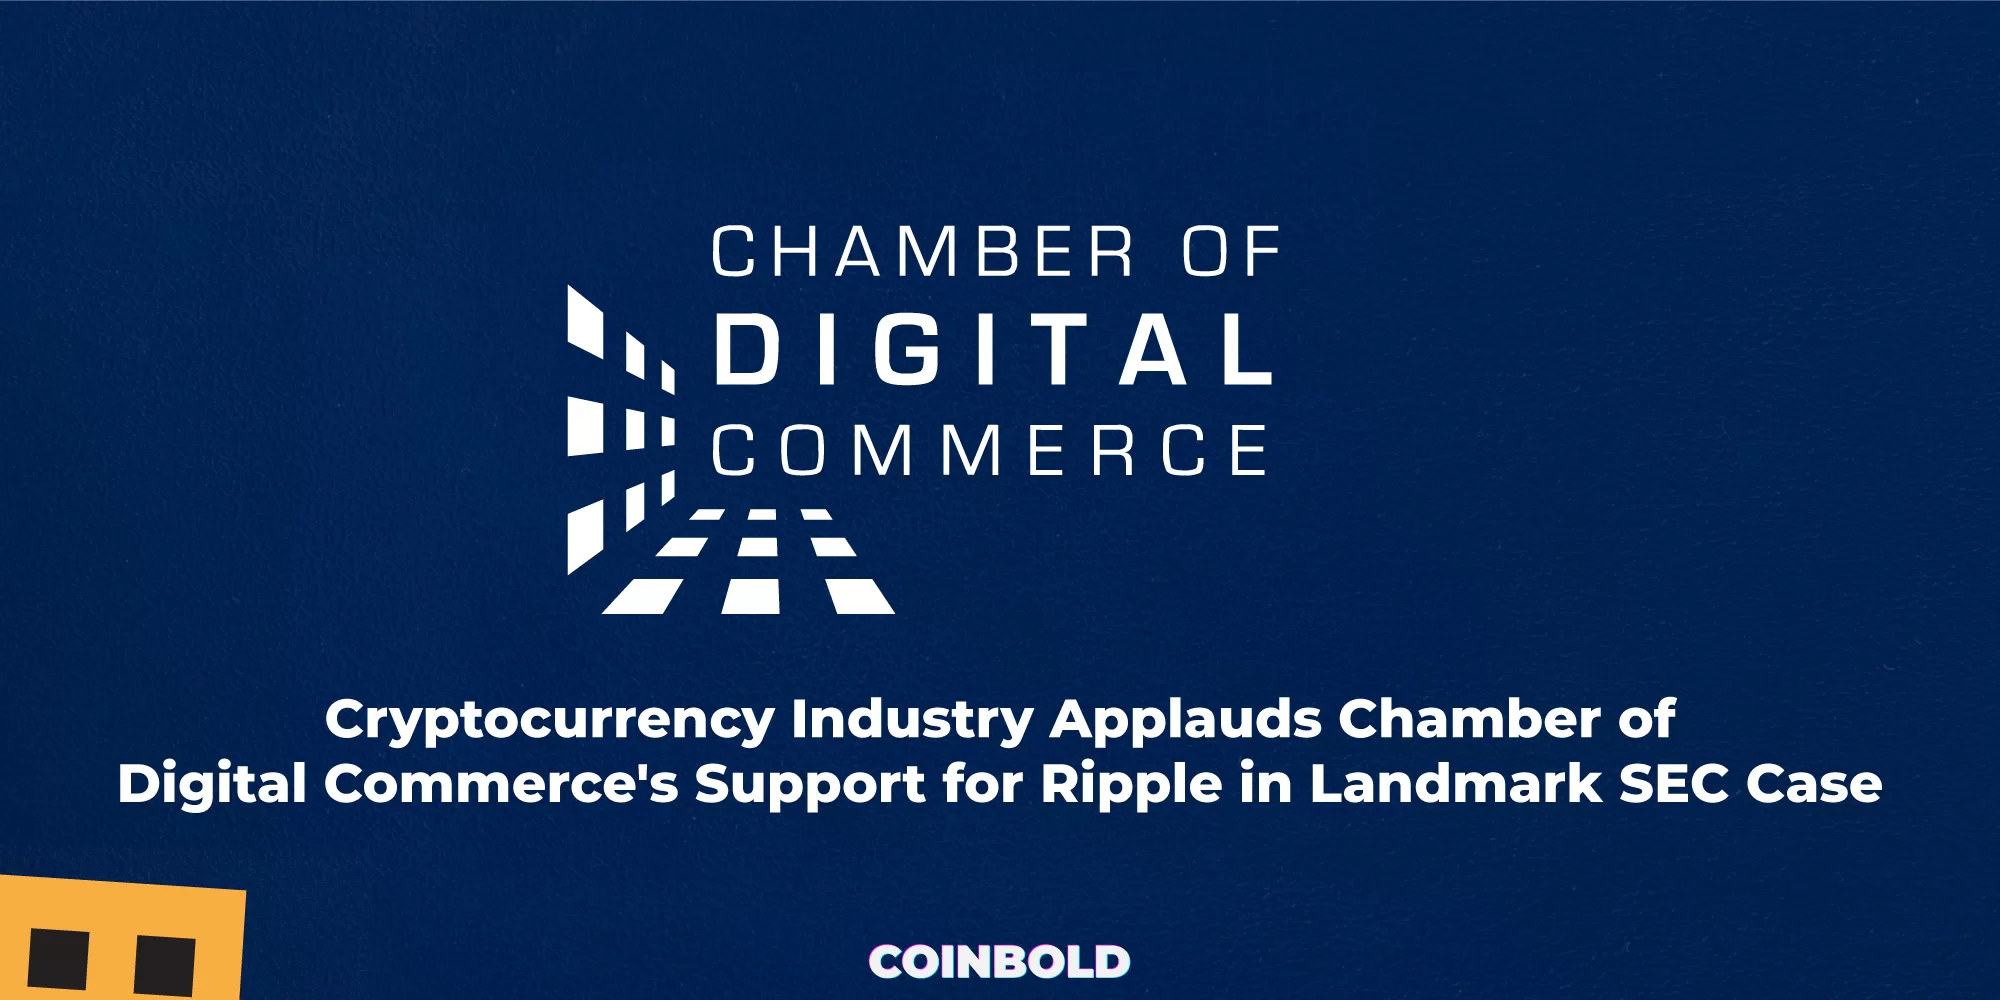 Cryptocurrency Industry Applauds Chamber of Digital Commerce's Support for Ripple in Landmark SEC Case